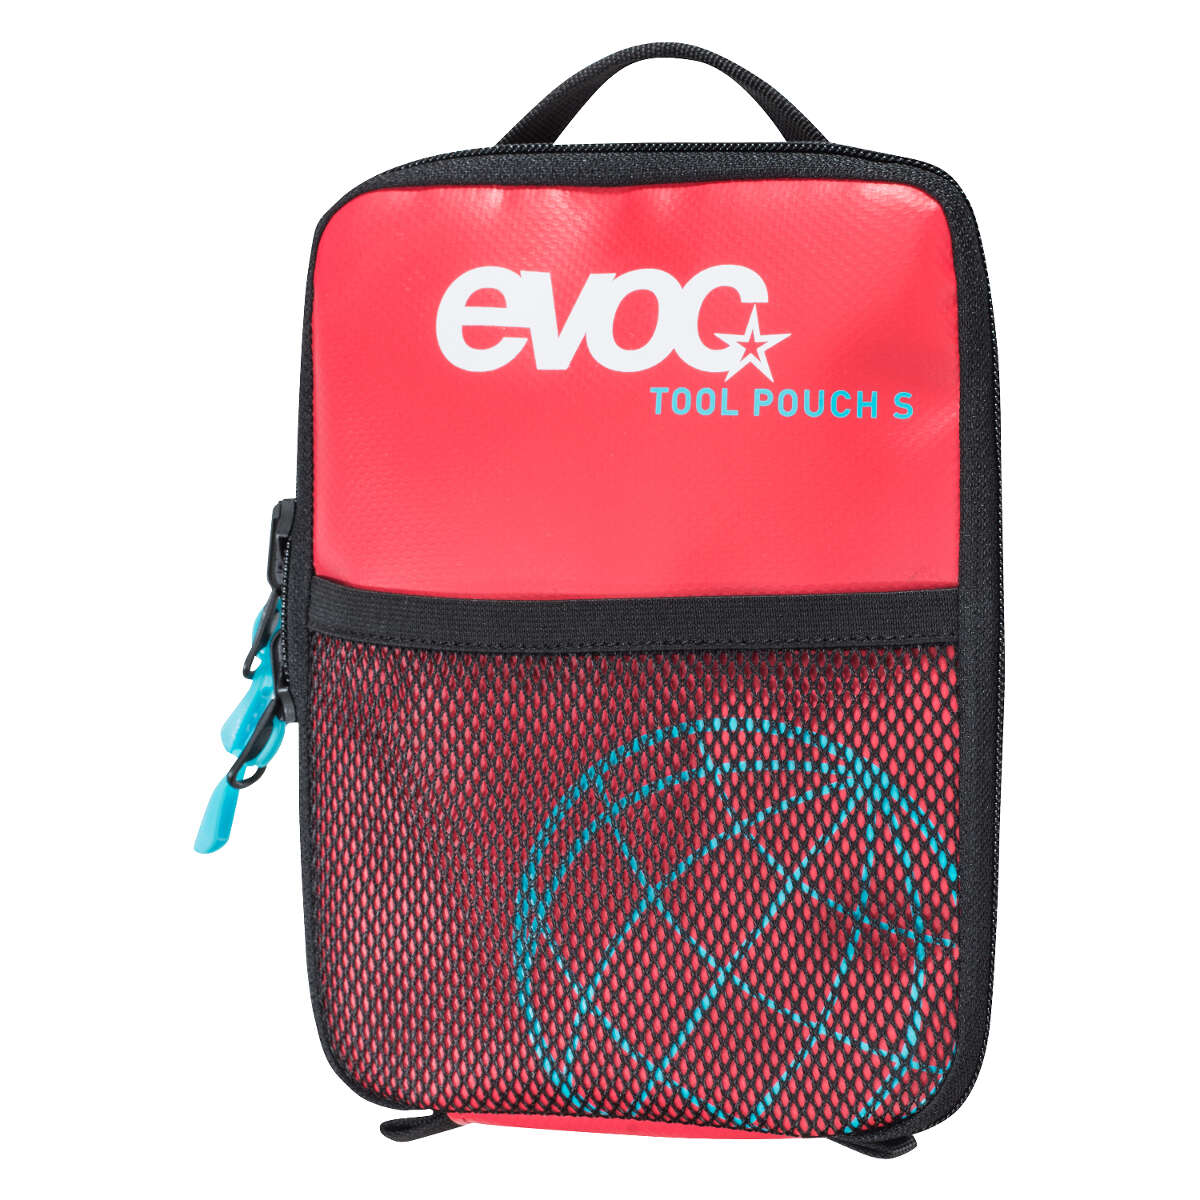 Evoc Tool Bag Tool Pouch 0.6L - Red